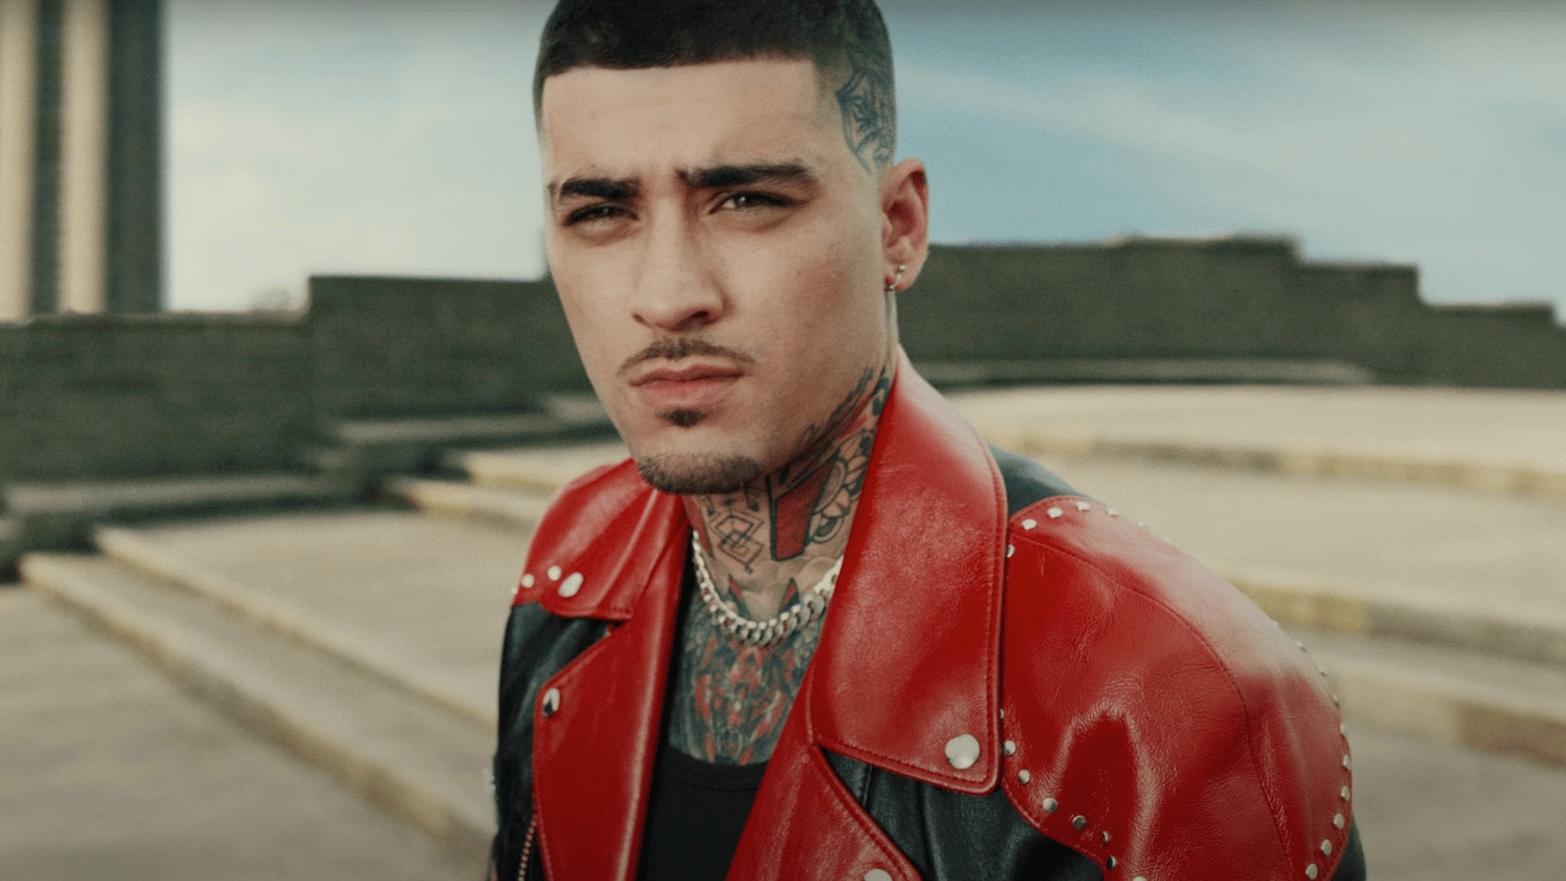 Zayn Malik has announced his first solo show in London